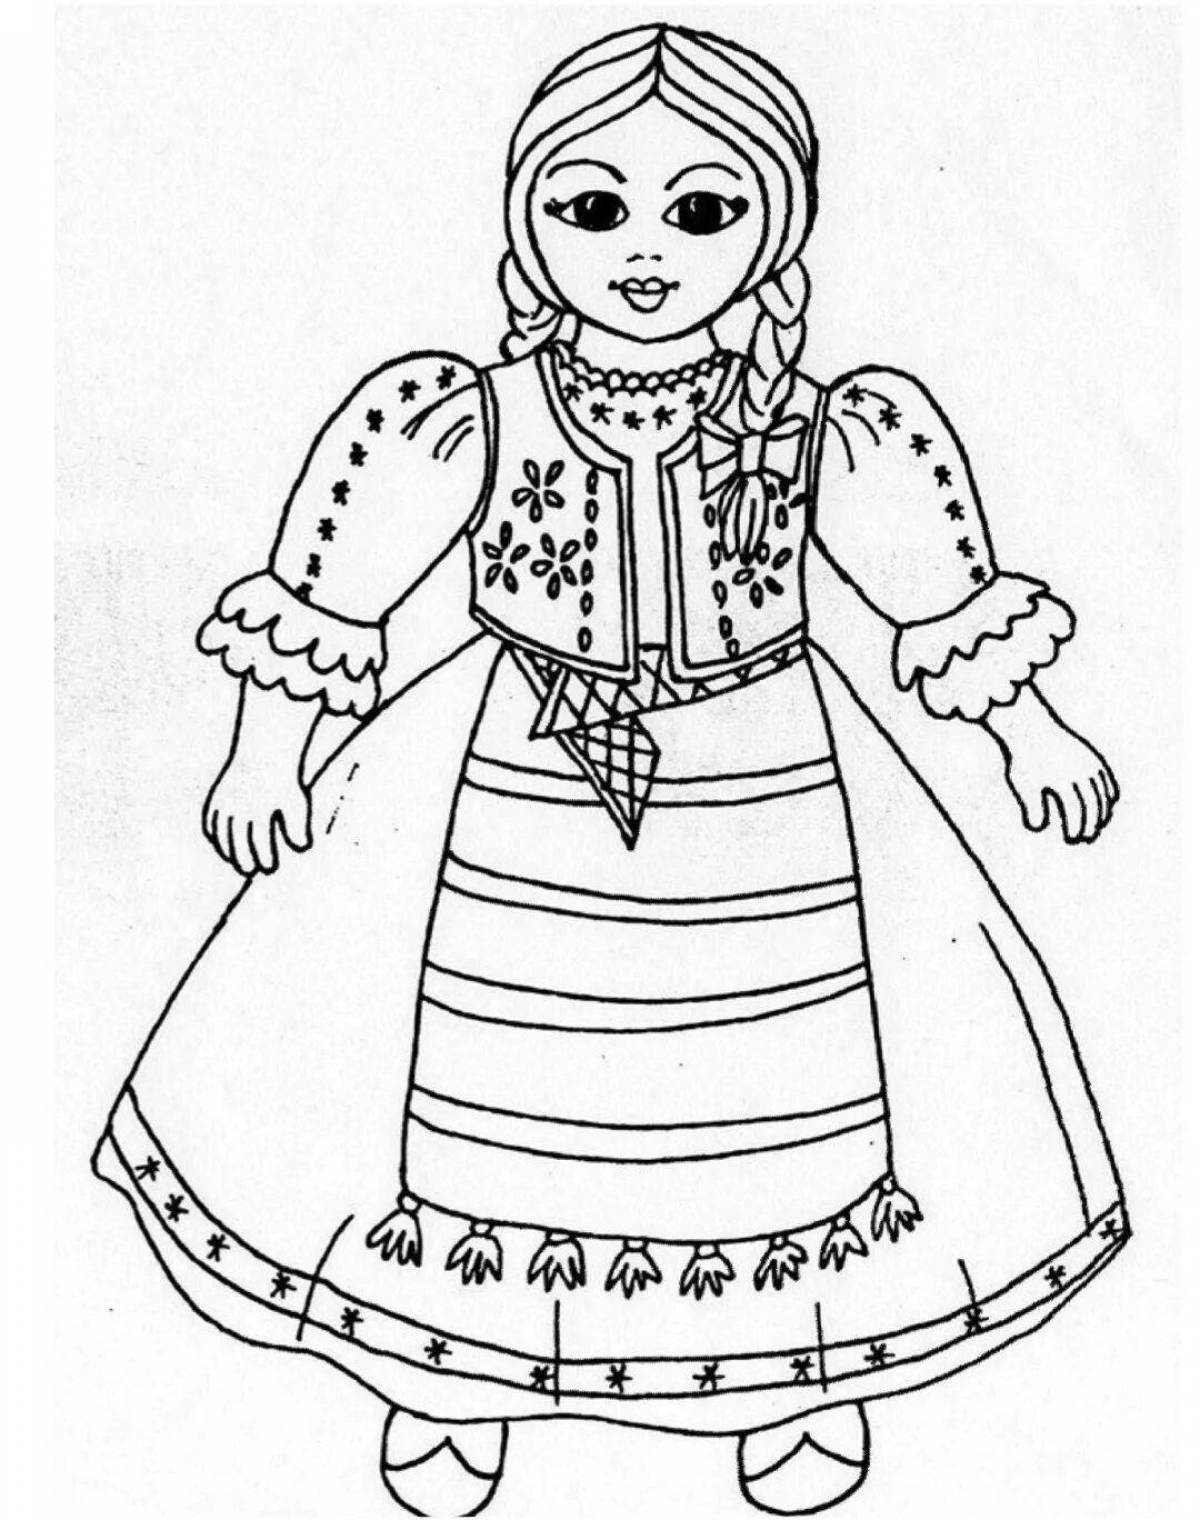 Gorgeous Russian folk clothes coloring book for kids